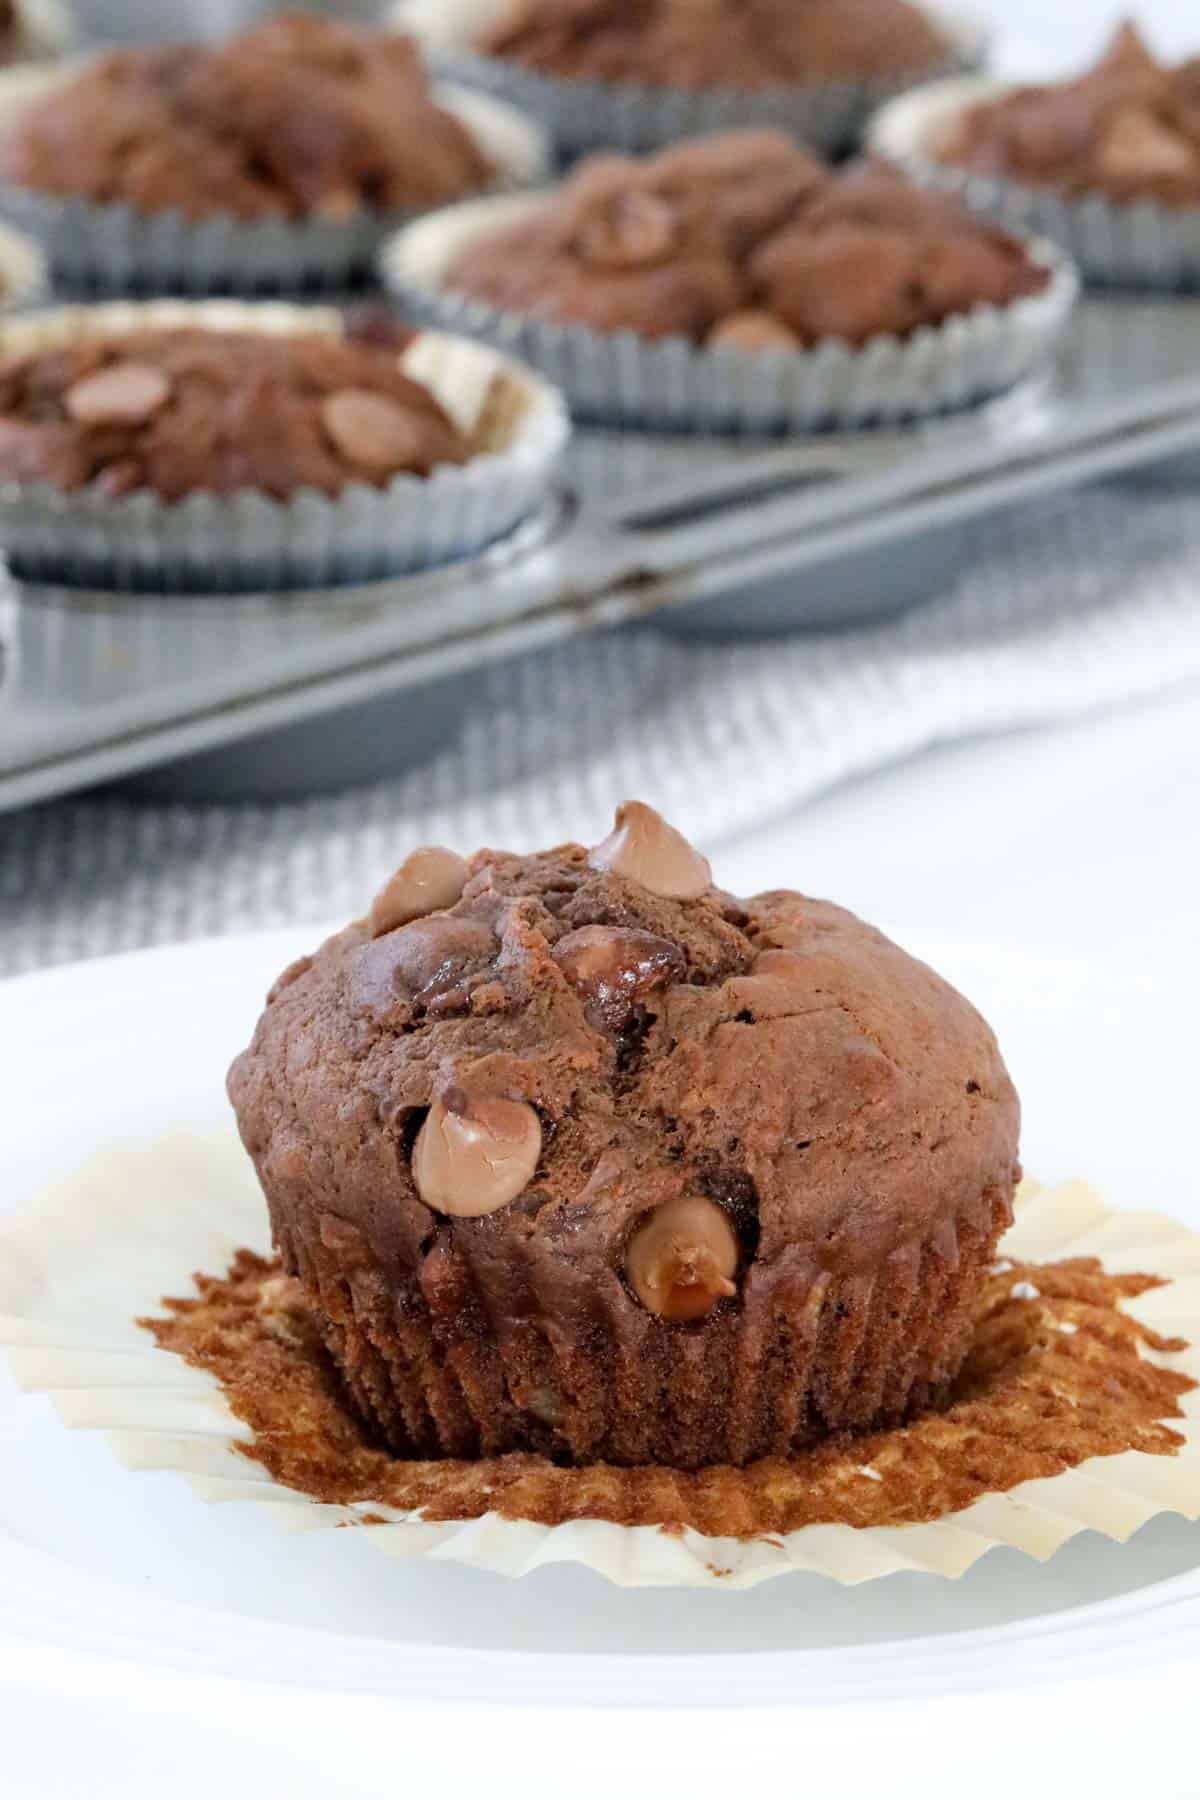 A chocolate muffin with the mffin case peeled open, in front of a tray full of baked muffins.